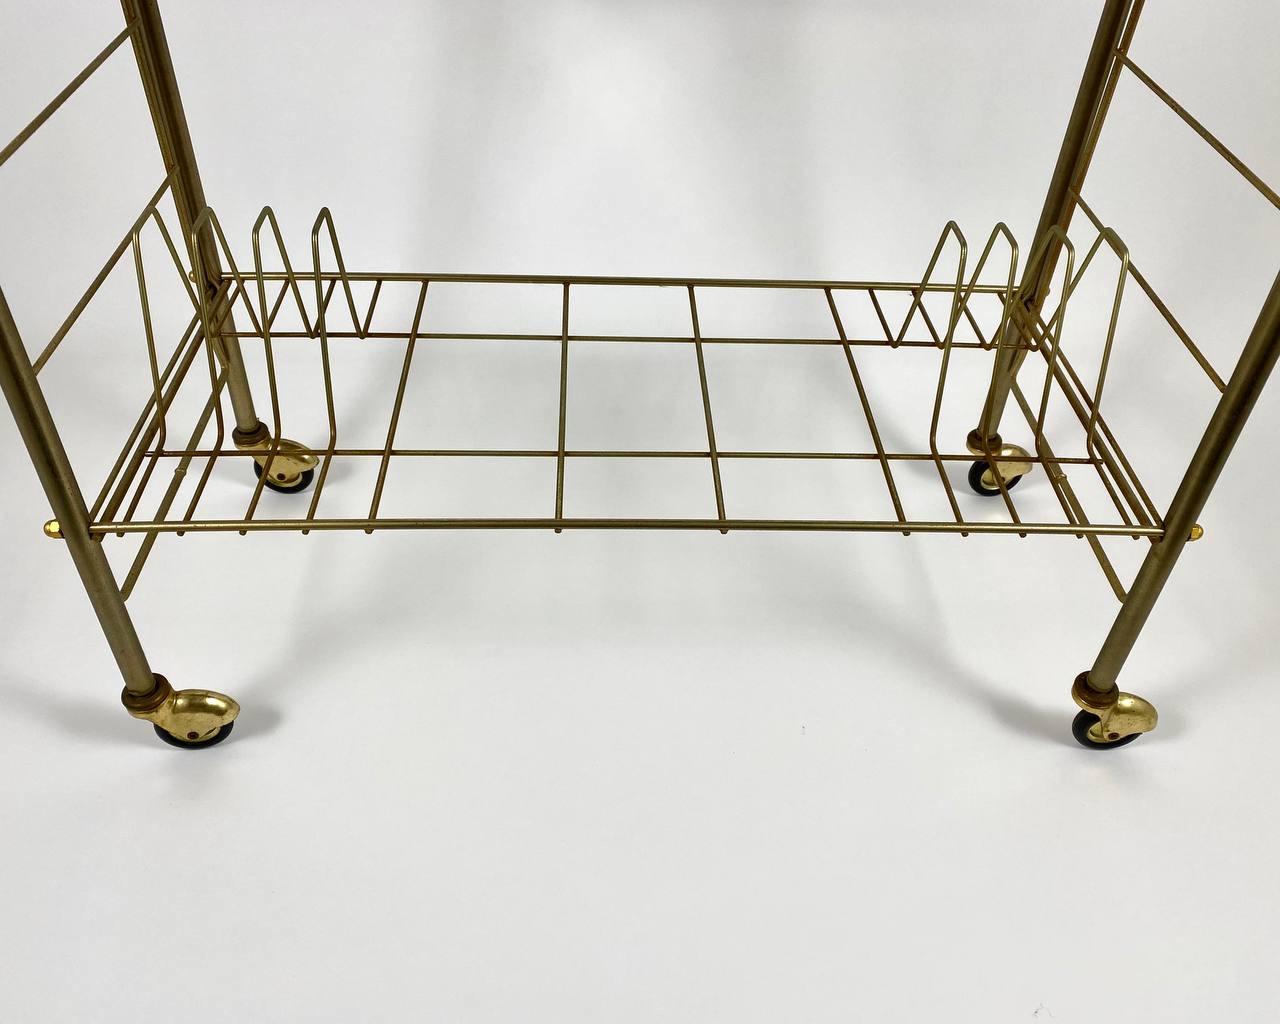 Vintage bar cart in formica wood and gold brass on wheels.

Germany. Stamped February, 1974.

Elegant serving table on wheels with a wood effect top and lower shelf for vinyl records storage, with a gold-tone metal base. 

Such a table is very